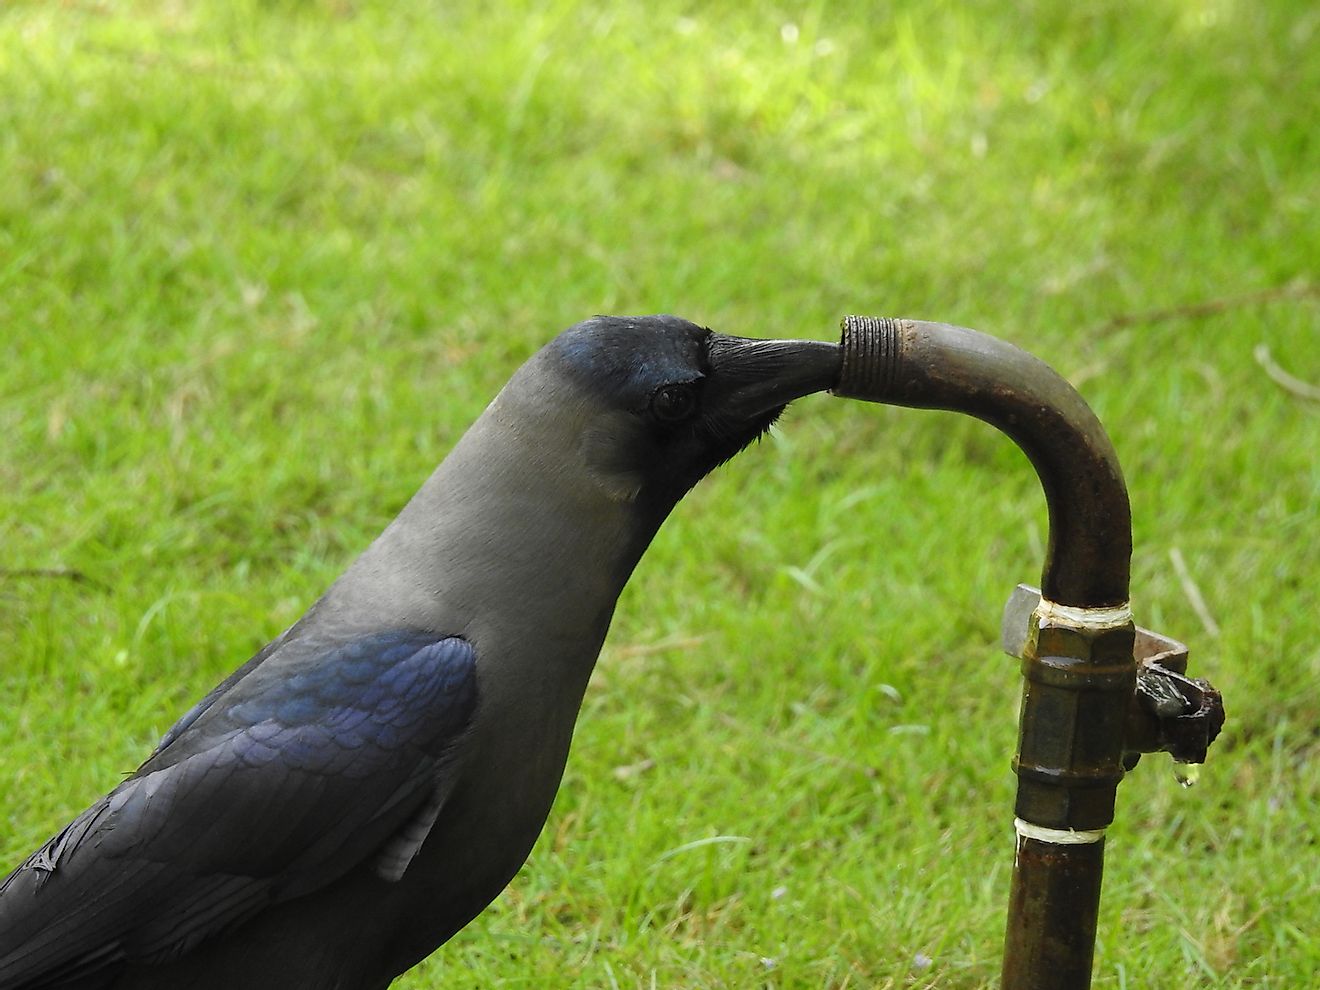 Crow drinking water from a tap. Image credit: Anishz/Shutterstock.com